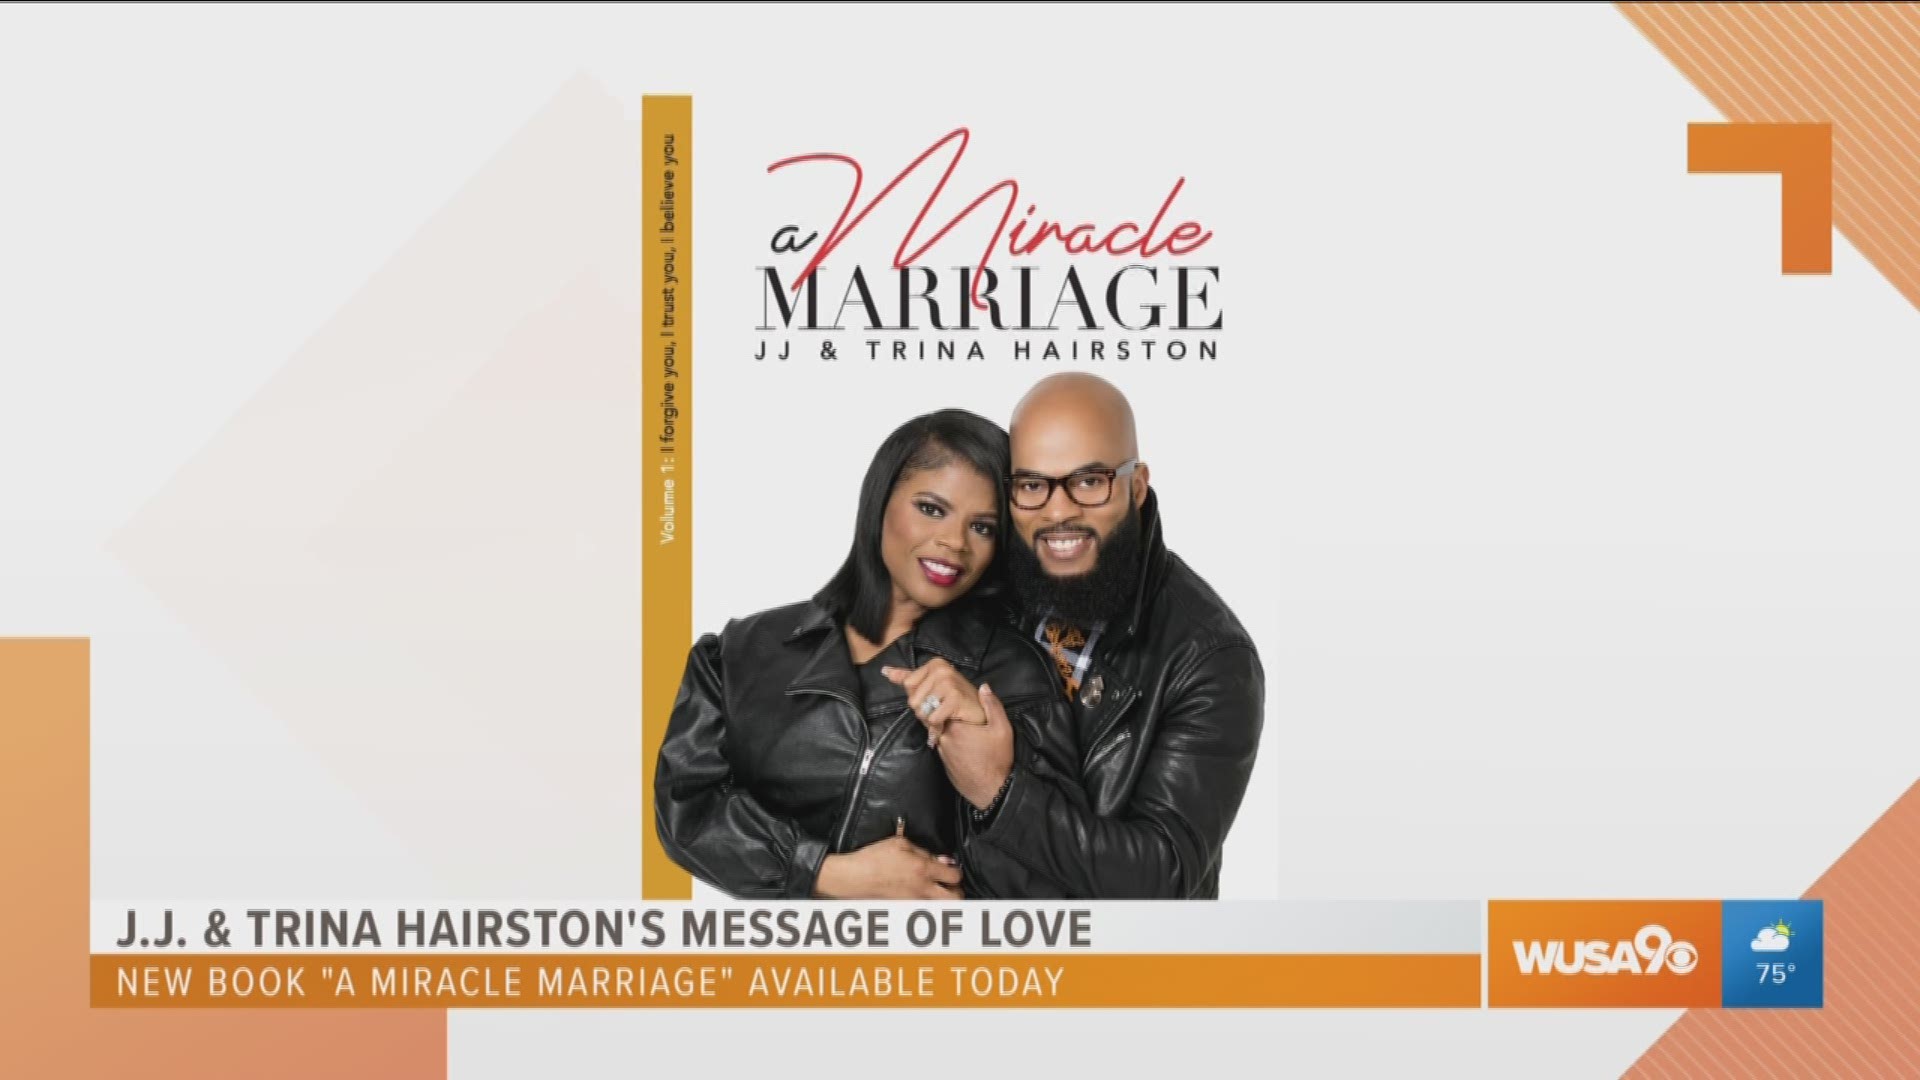 Gospel singer J.J. Hairston and his wife Trina stopped by Great Day to talk about their latest book, "A Miracle Marriage". Their book explores the secrets of love from the perspective of the Hairston's from their 25 years of marriage. J.J.'s 10th studio album "Miracle Worker" is available now!